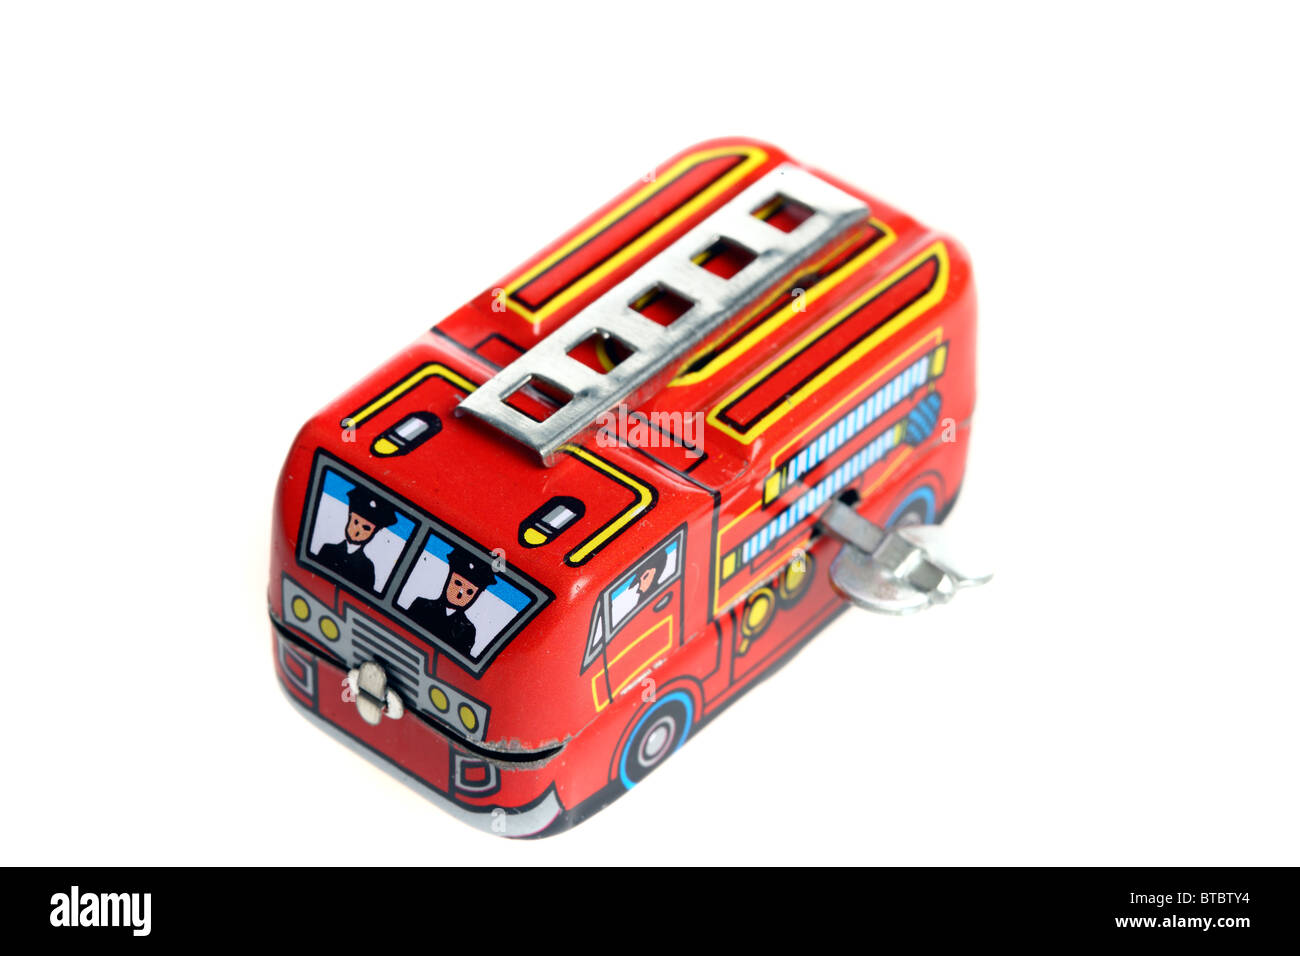 Tin toy, fire engine, wind up motor by a metal key. Stock Photo